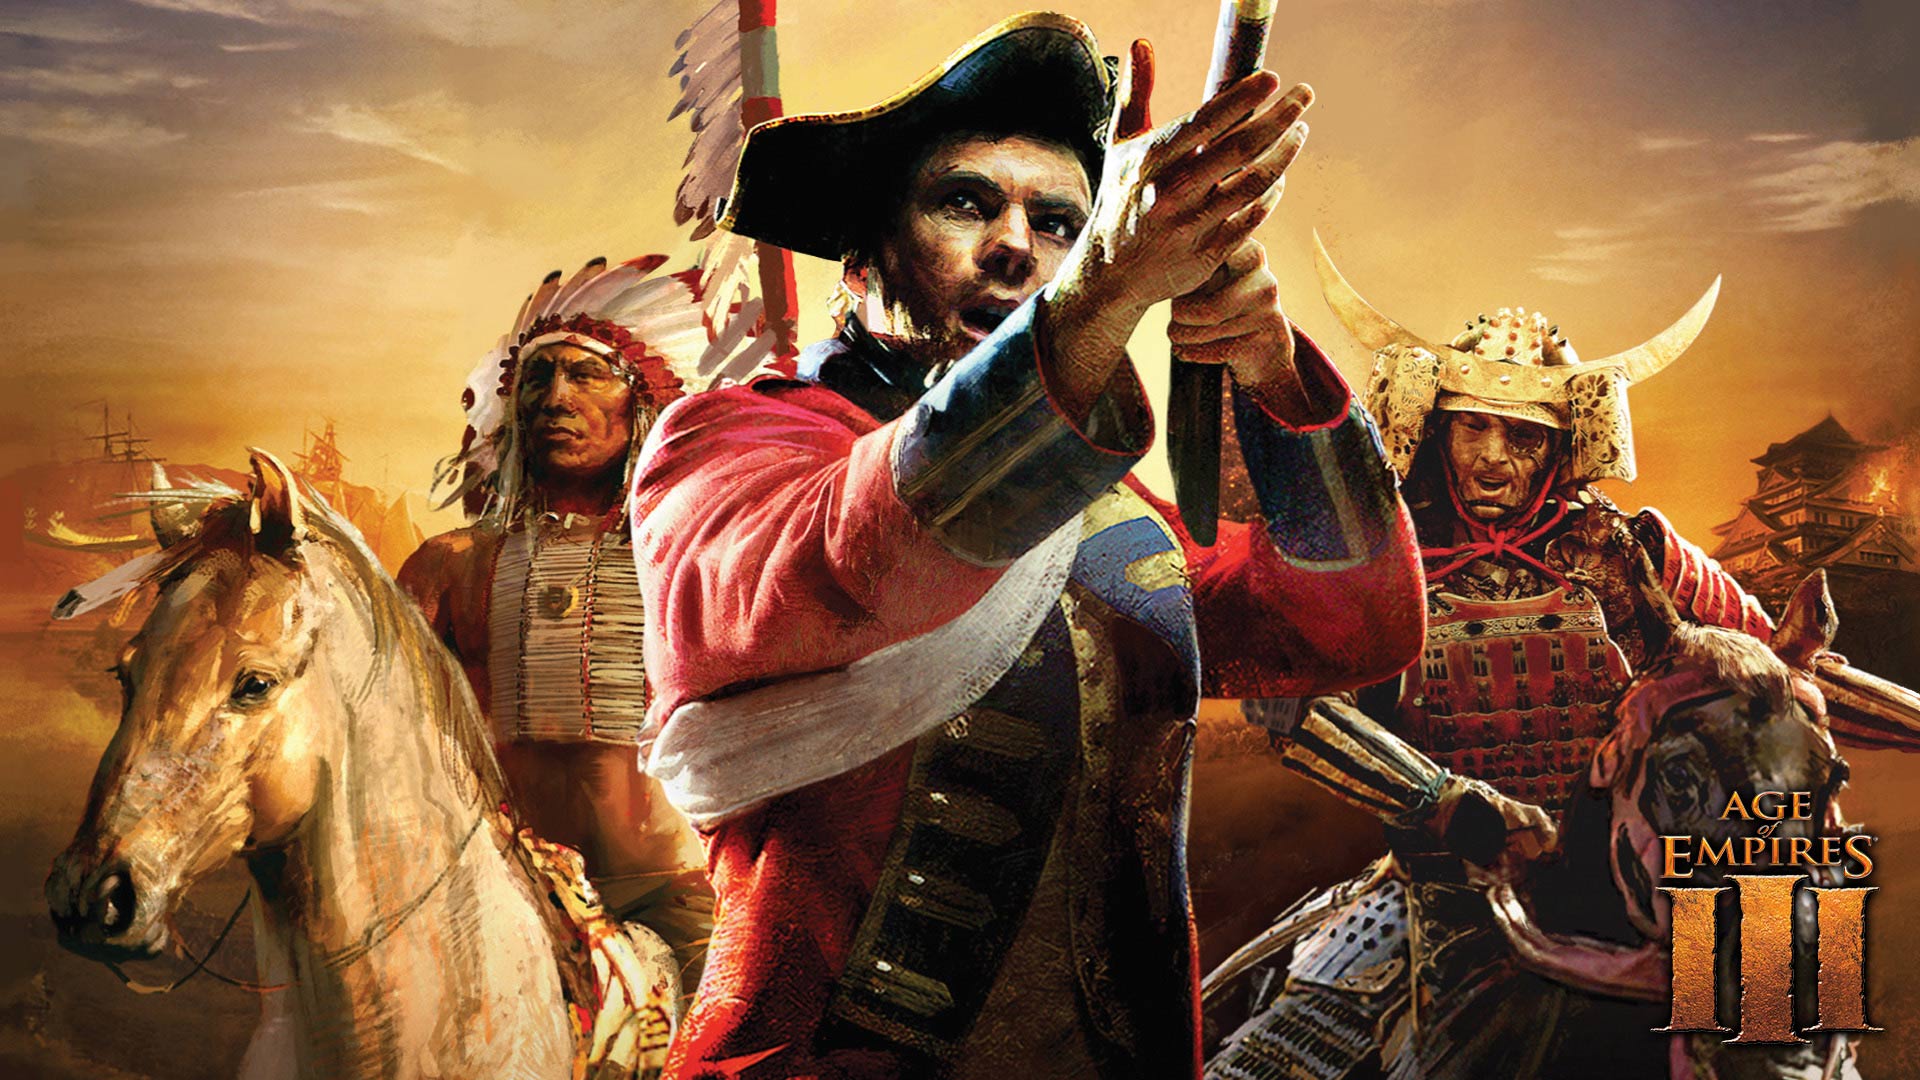 Wallpaper From Age Of Empires Iii Gamepressure